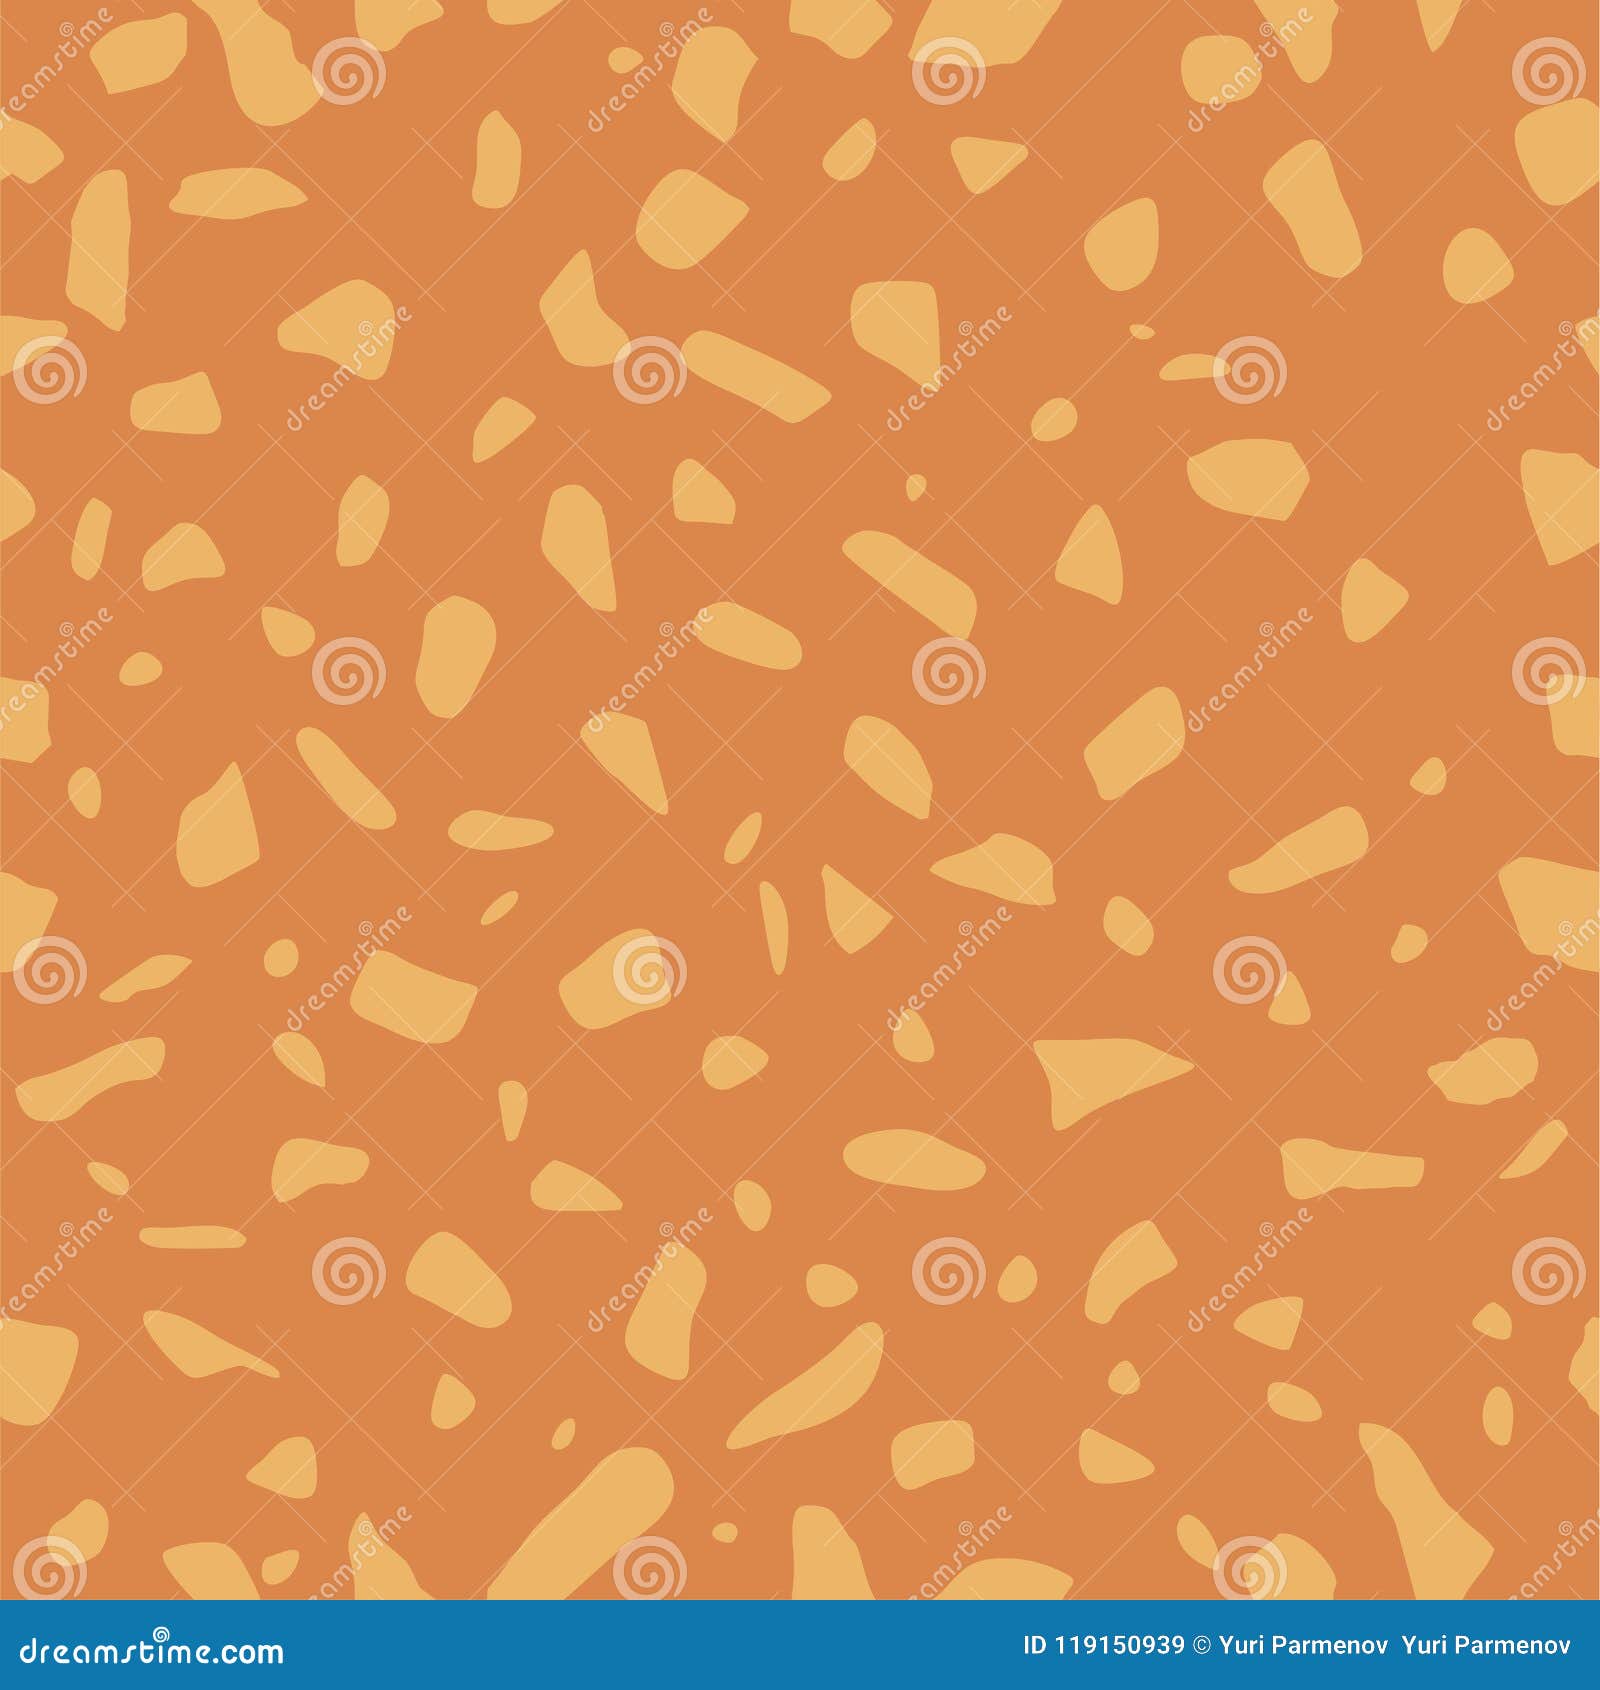 cigarette filter paper, seamless texture.  background